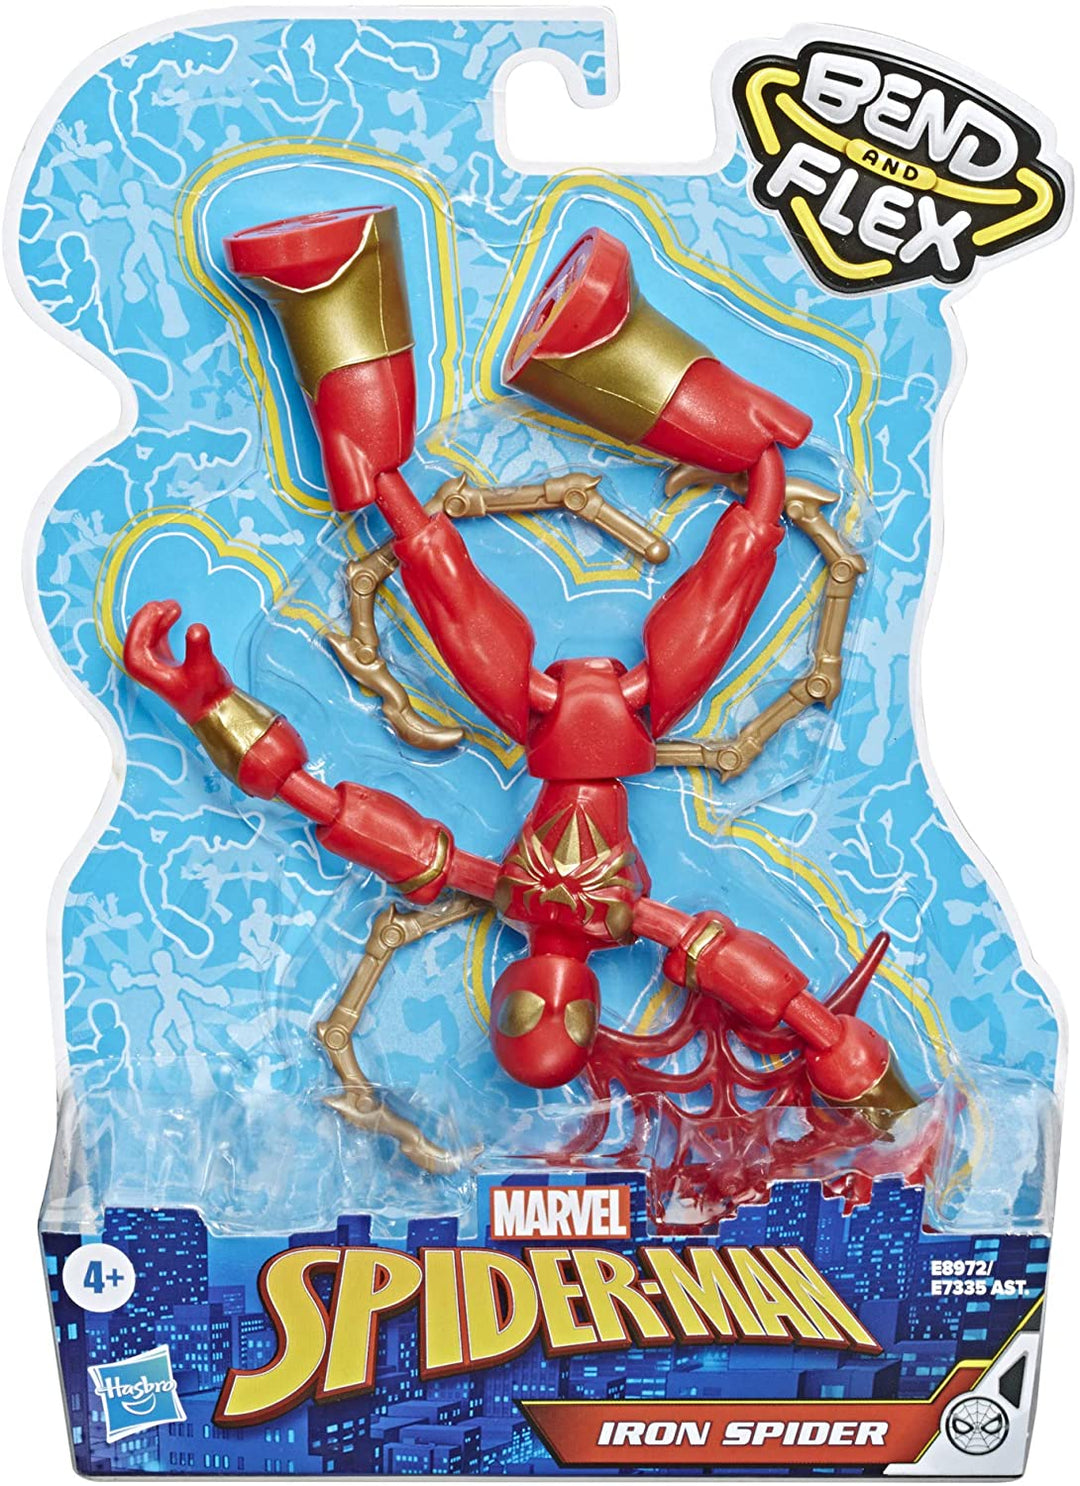 Marvel Spider-Man Bend and Flex Iron Spider Action Figure Toy, 6-Inch Flexible Figure